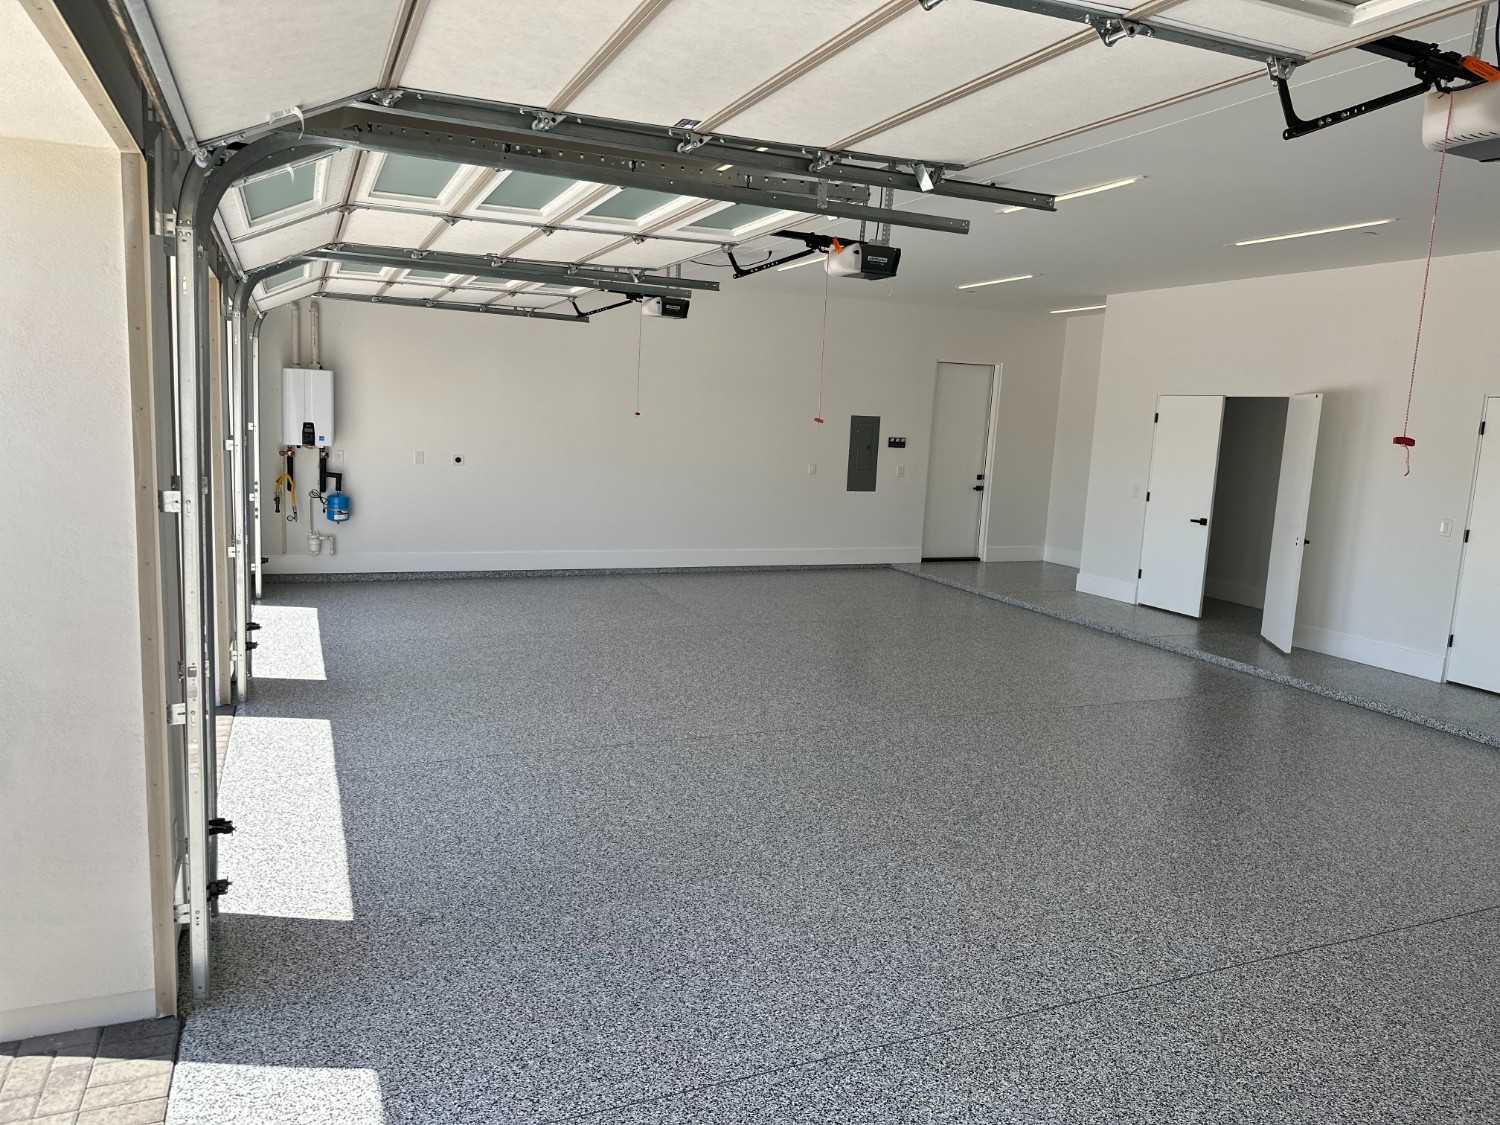 Garage Floor Coating Solutions Florence: Transform Your Space